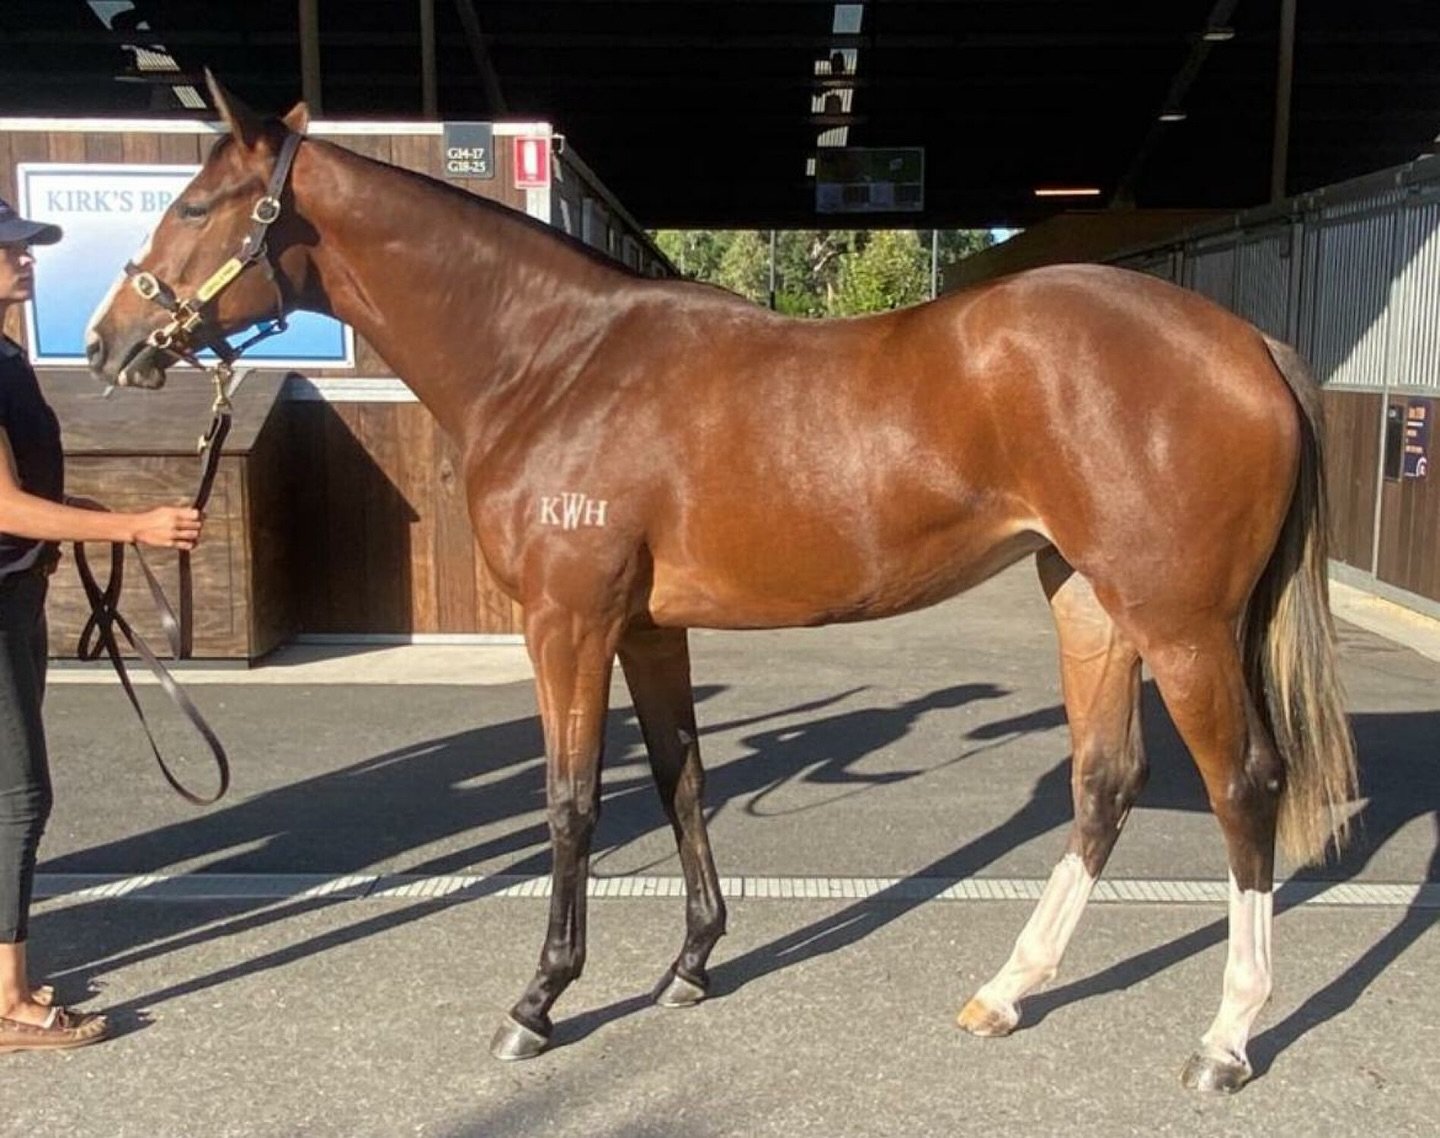 Purchase no.2
A beautiful filly by Castelvecchio out of winning mate Golden Statue. 
This filly is out of a half-sister who produced champion sprinter HAY LIST😮
We&rsquo;ll send her to @johnthompsonracing as JT trains the sister. 
Once again, this r